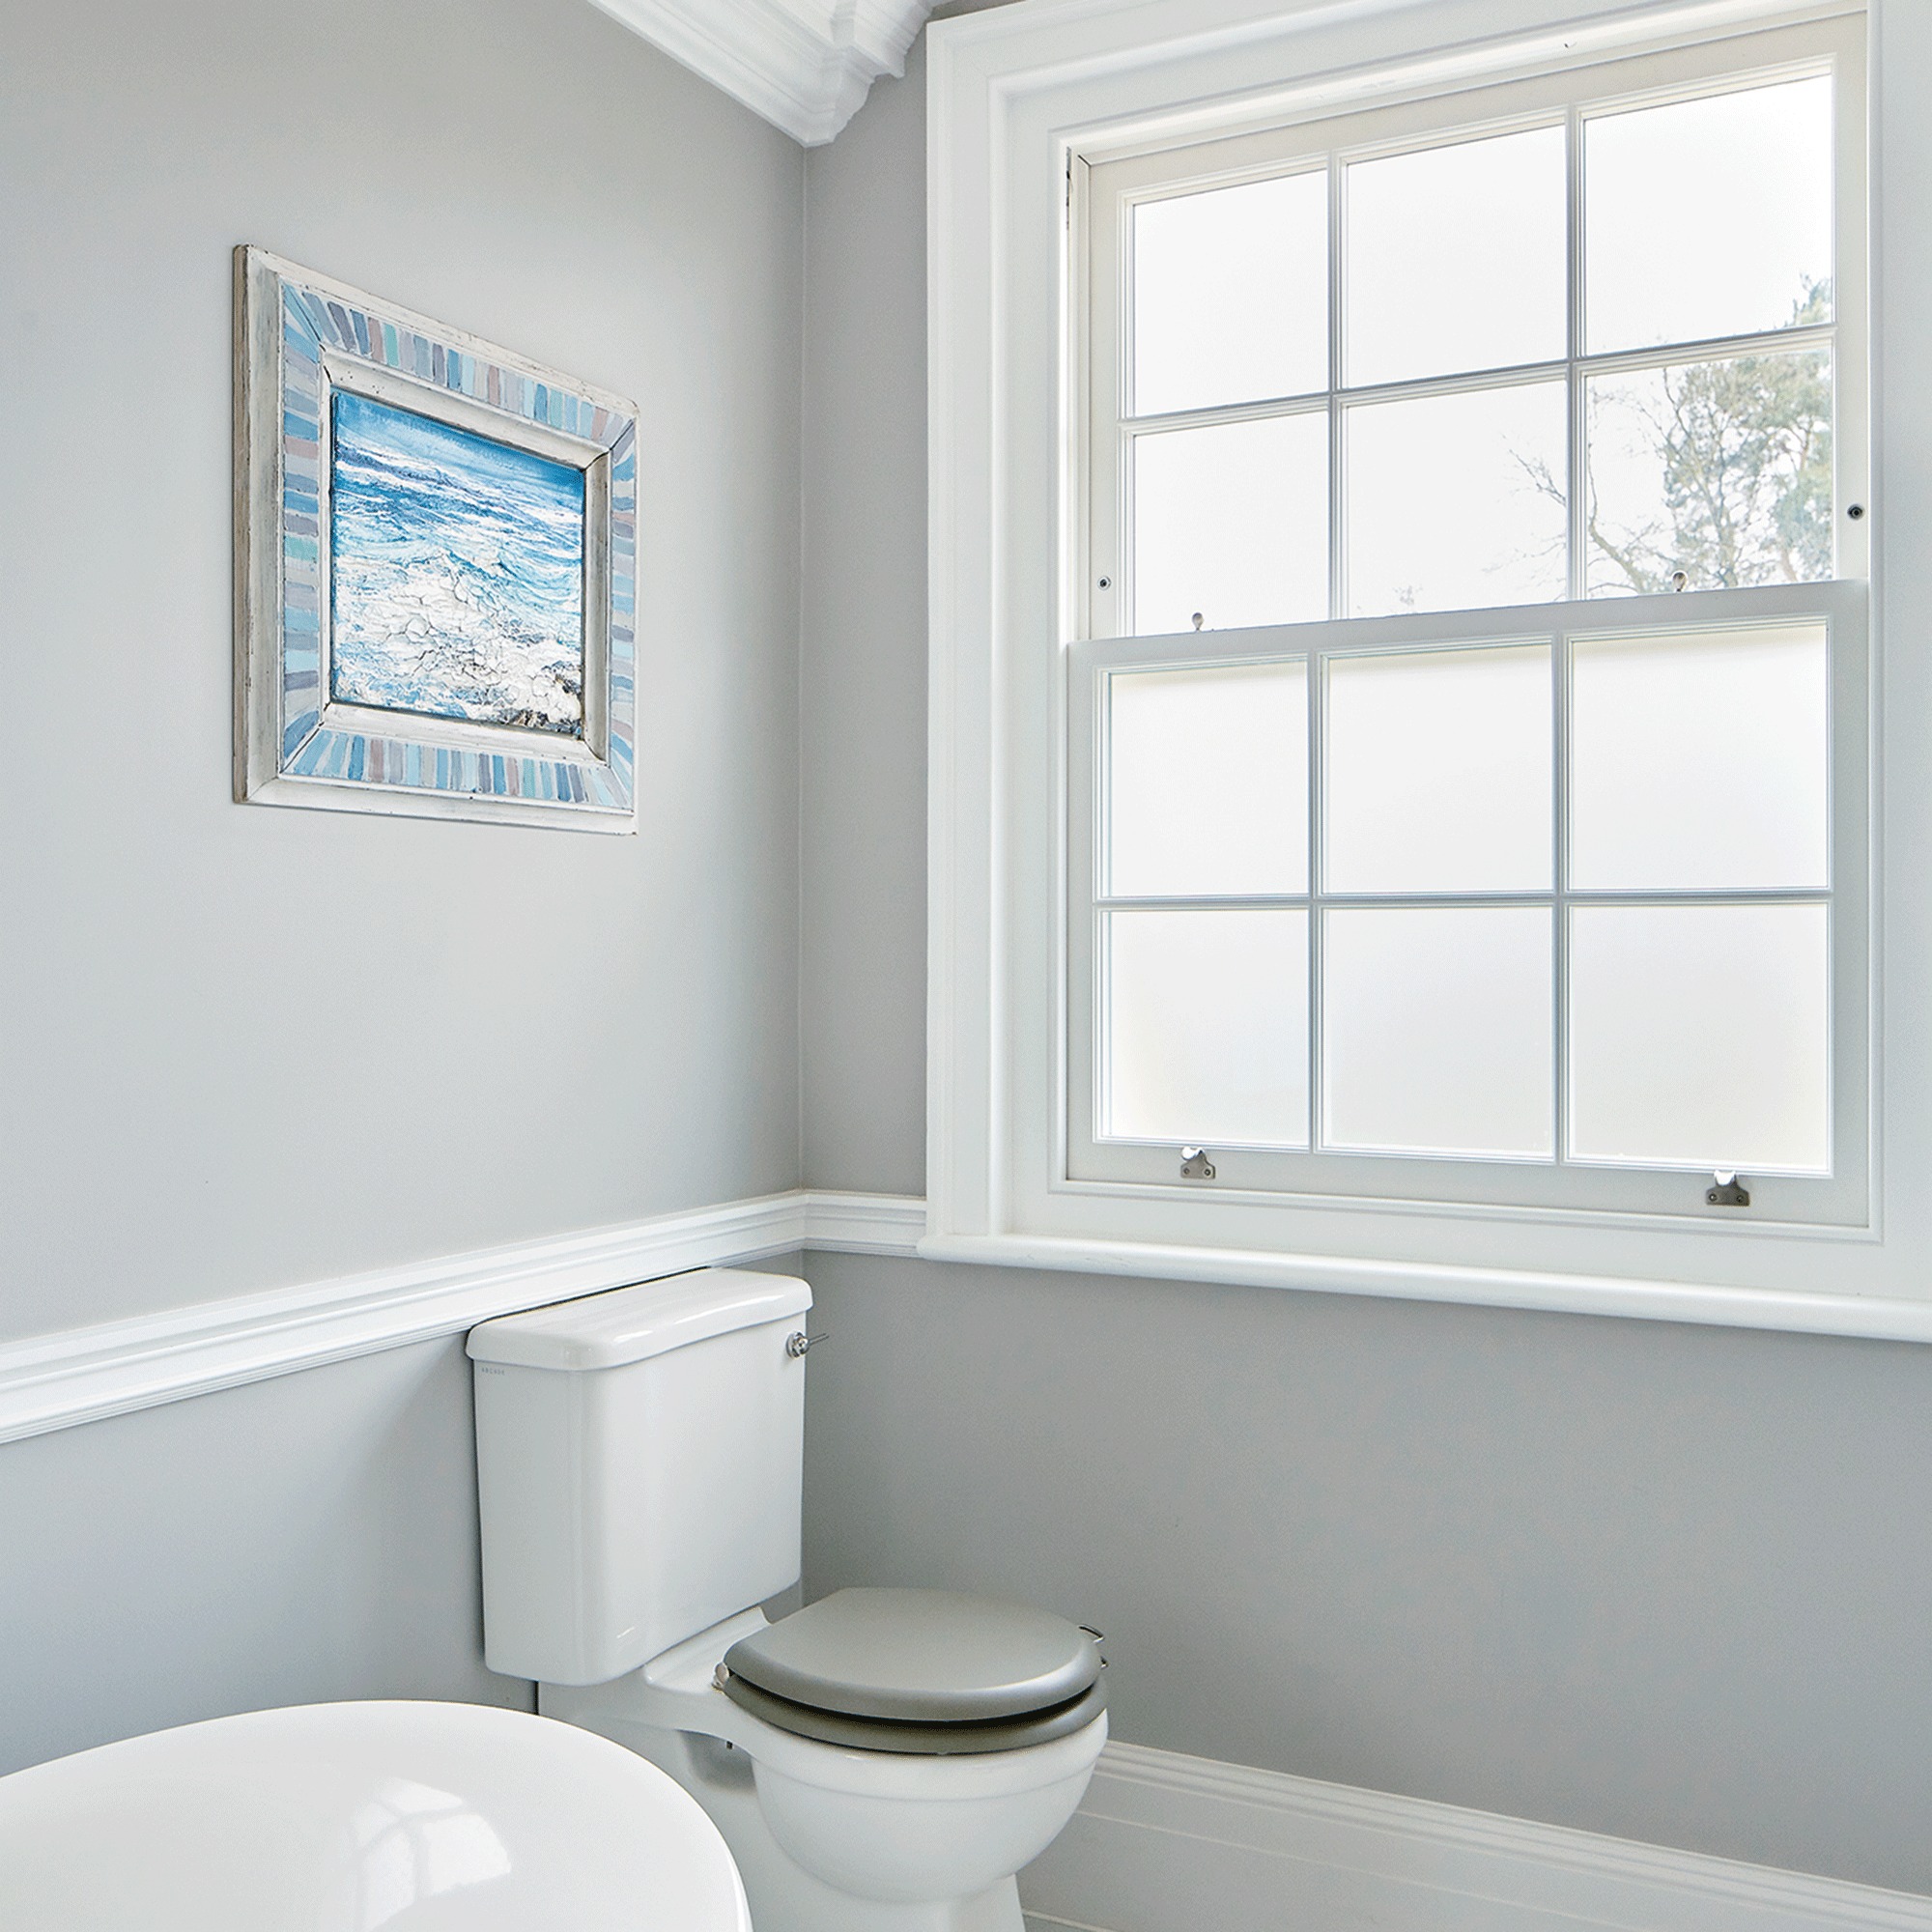 Frosted glass window in bathroom